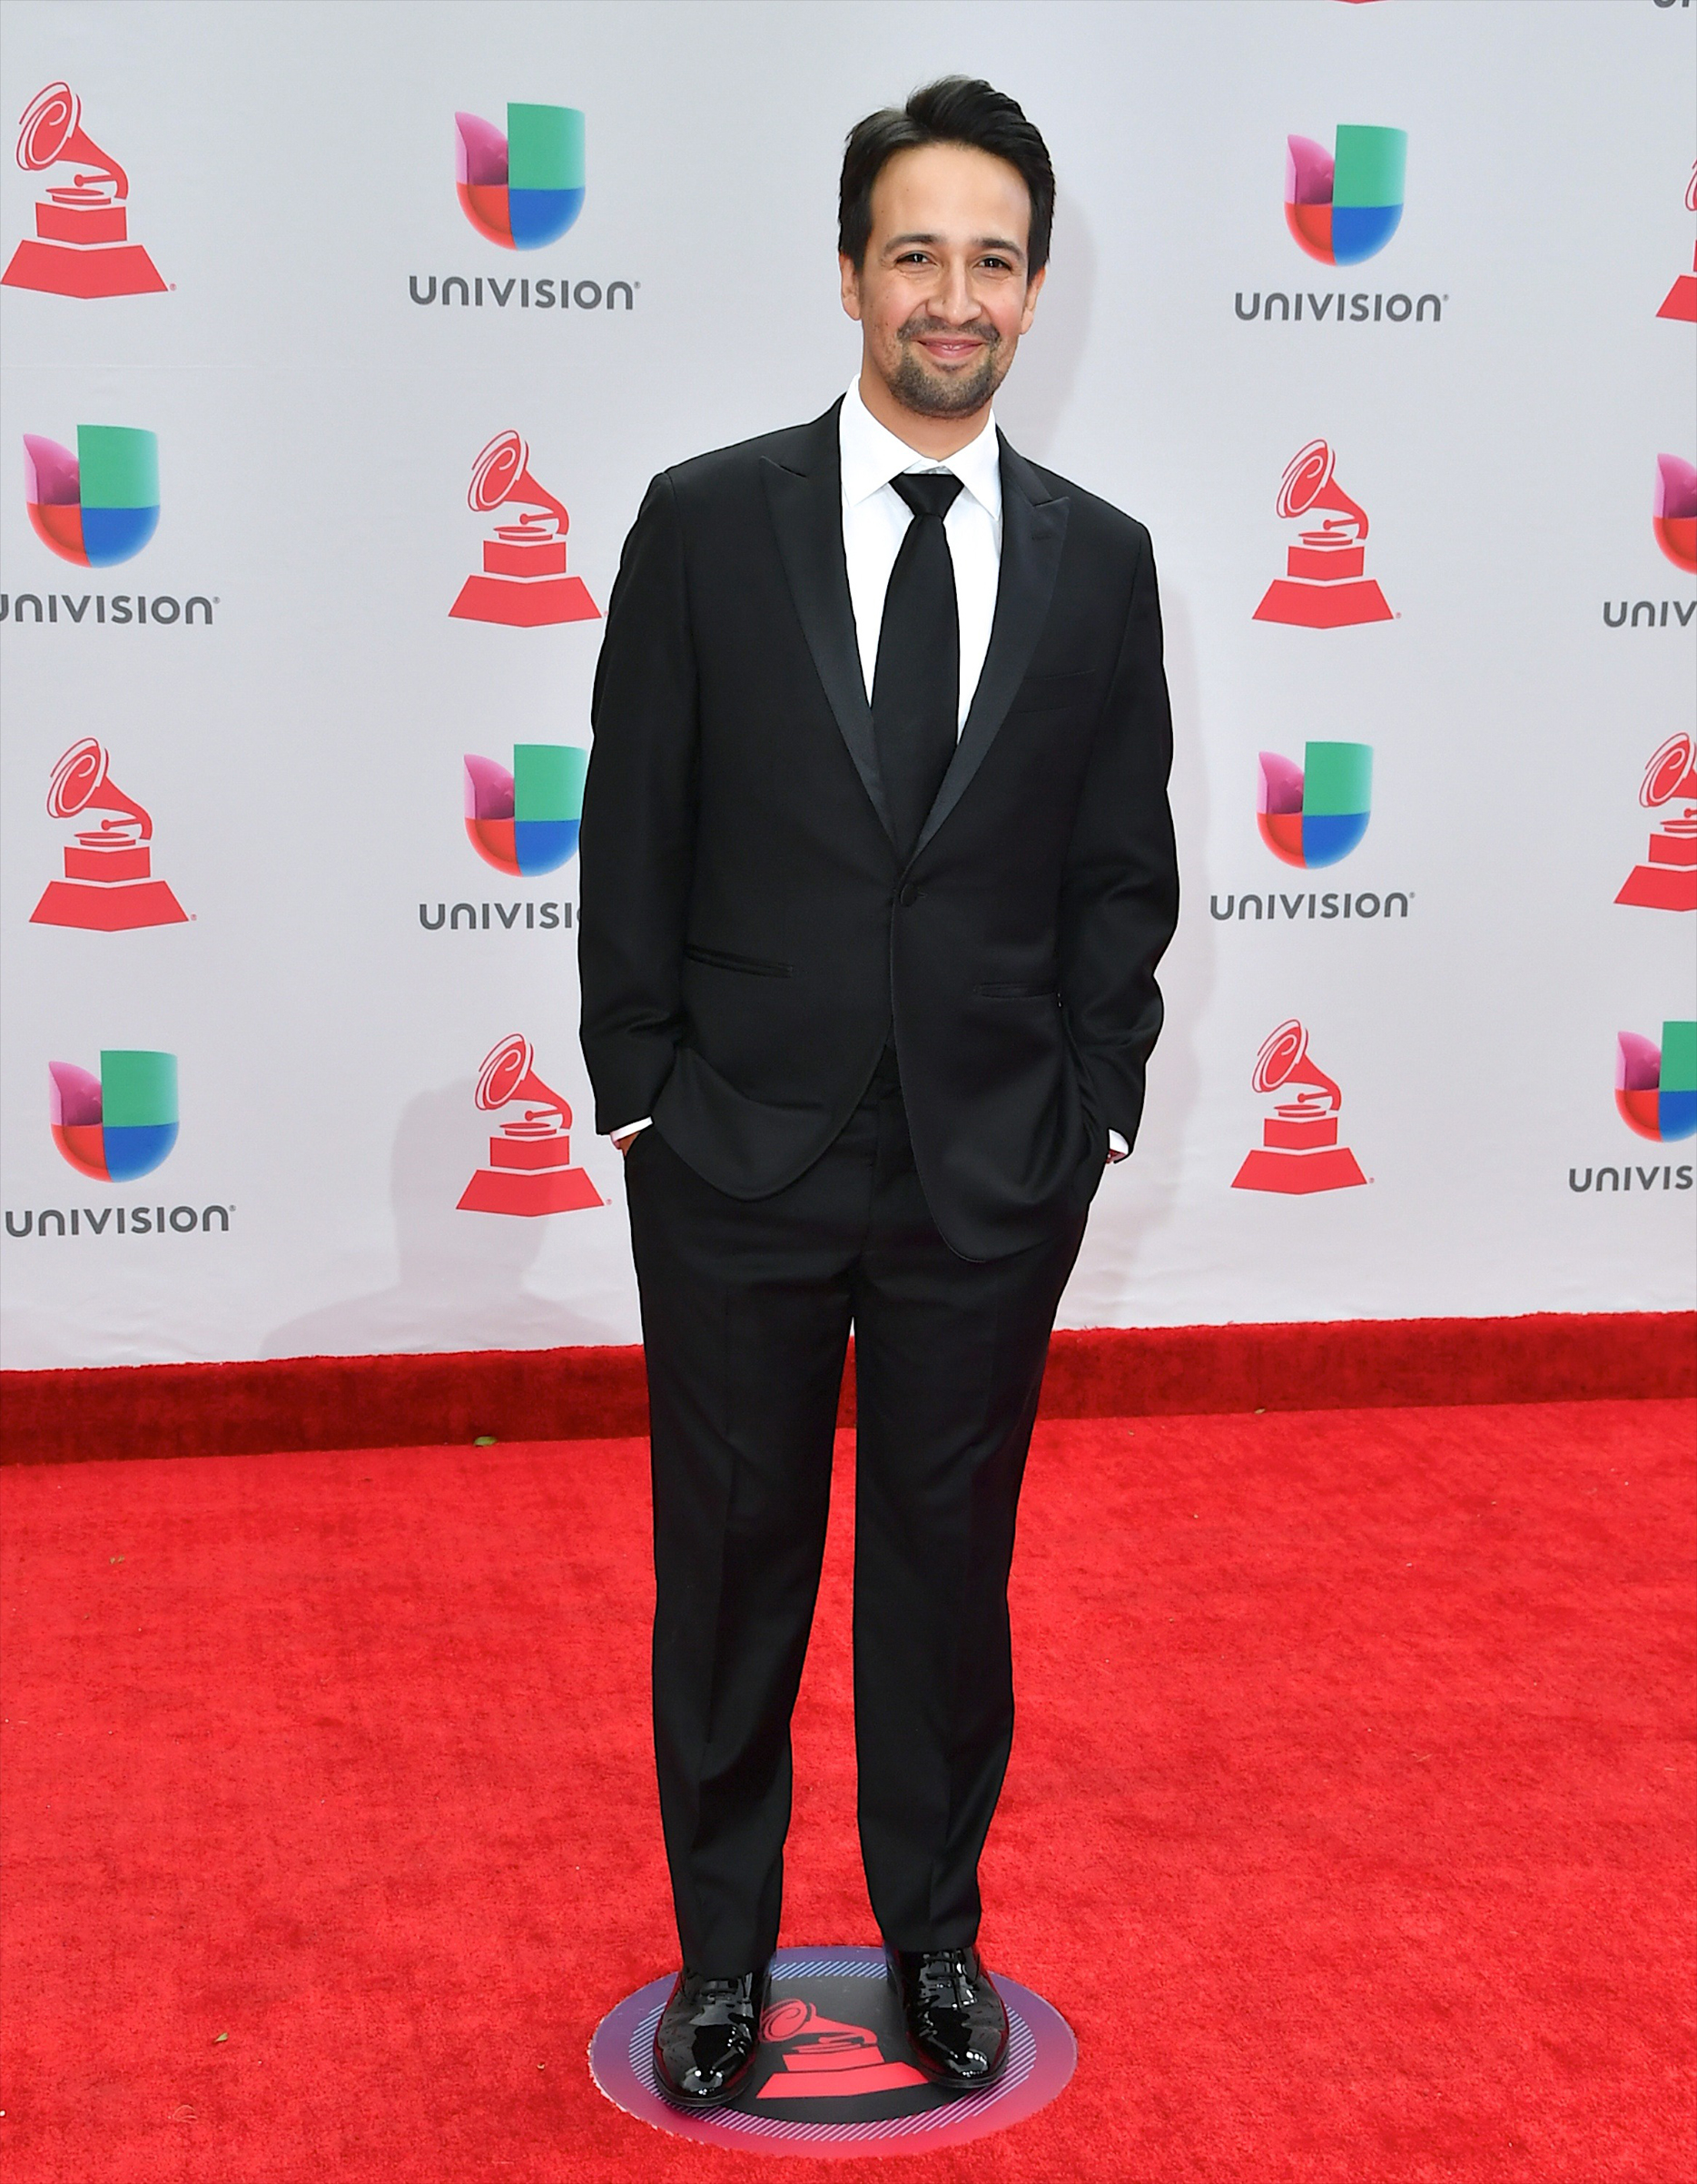 Lin-Manuel Miranda attends the 18th Annual Latin Grammy Awards at MGM Grand Garden Arena on November 16, 2017 in Las Vegas, Nevada. (Mindy Small—Getty Images)